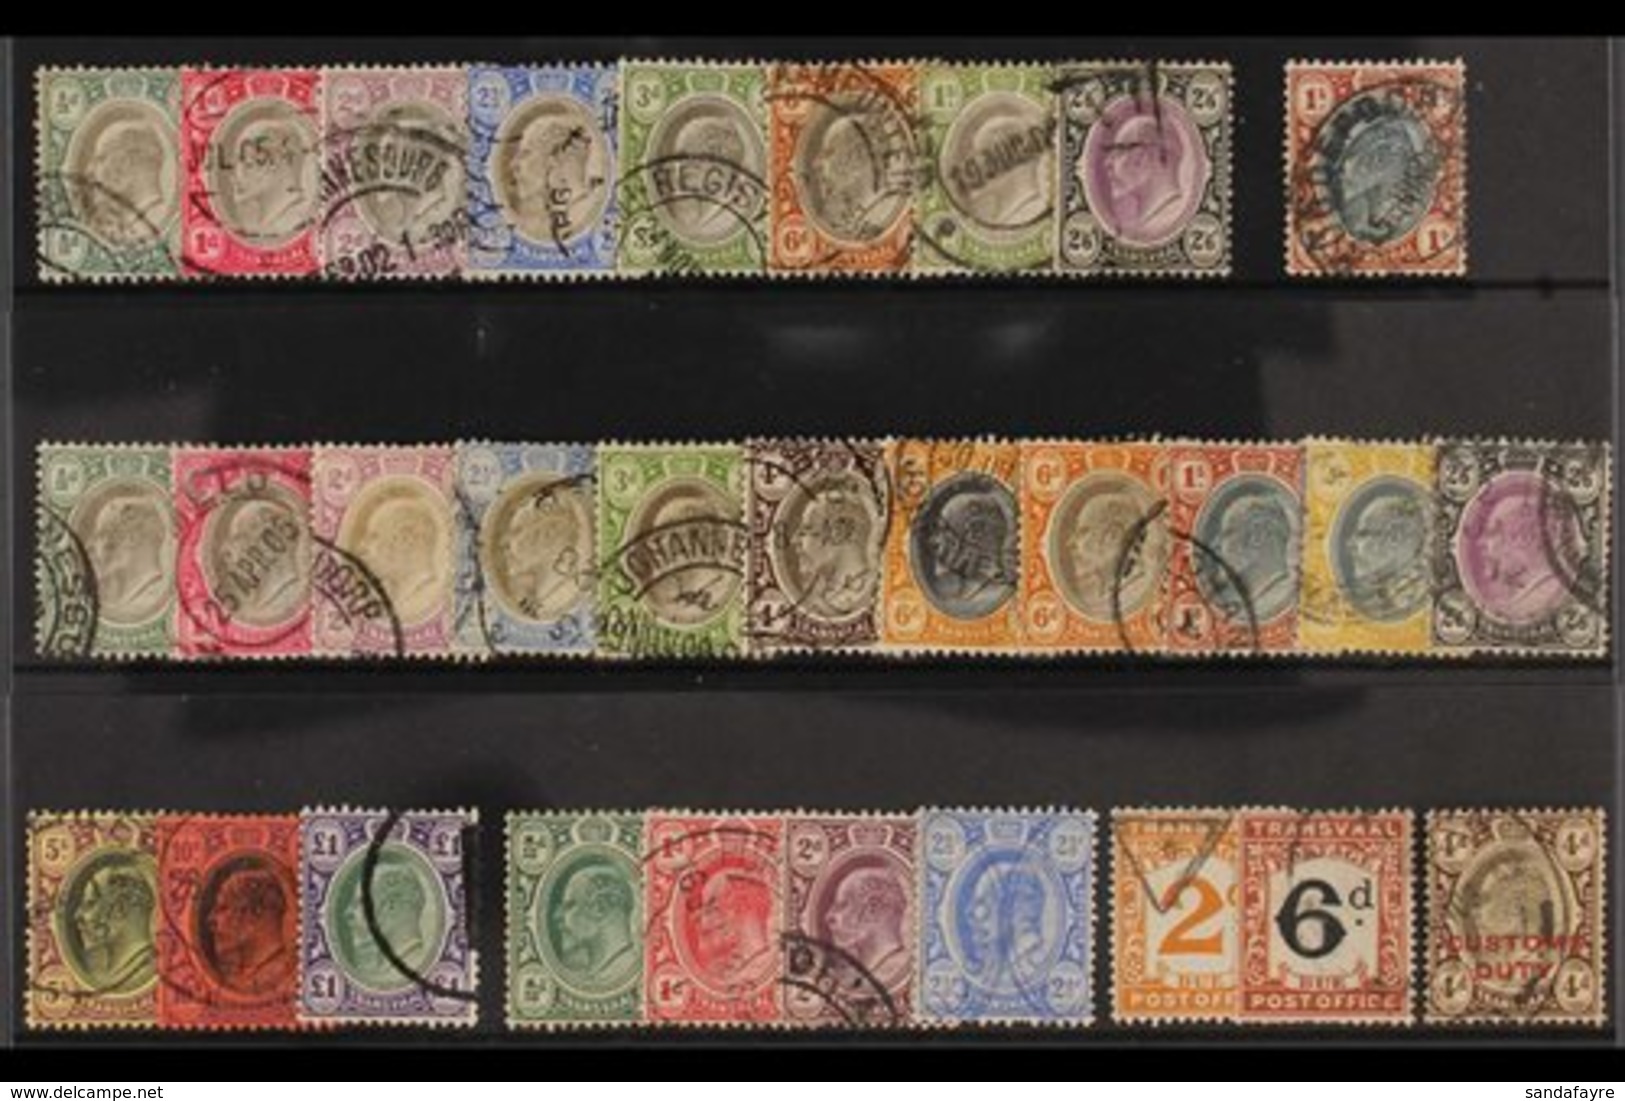 TRANSVAAL 1902-09 KEVII USED RANGES That Includes 1902 CA Wmk Range With Most Values To 2s6d, 1903 1s, 1904-09 Set Of Al - Unclassified